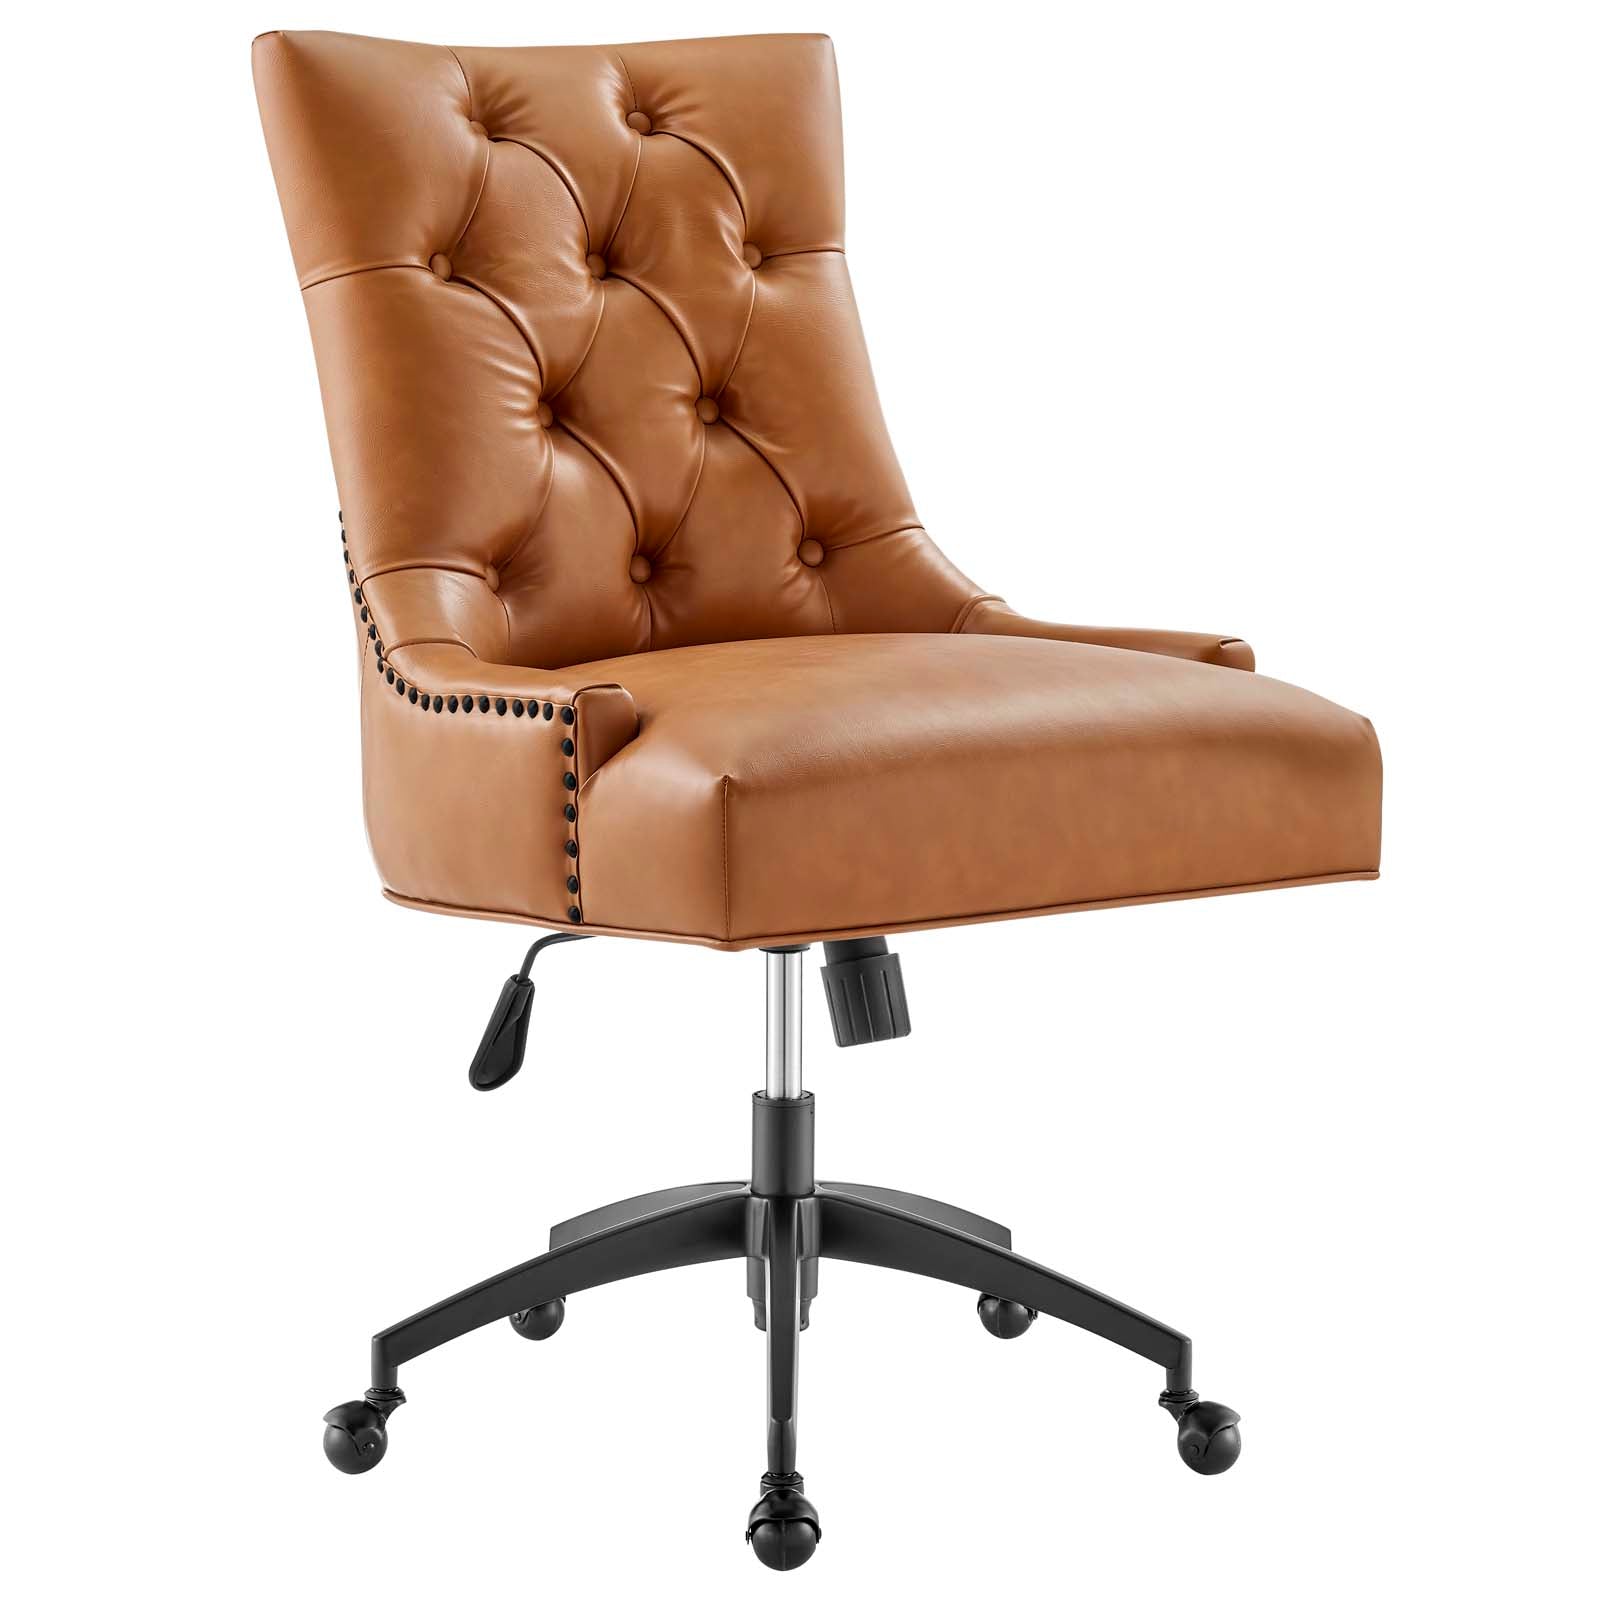 Modway Task Chairs - Regent Tufted Vegan Leather Office Chair Black Tan